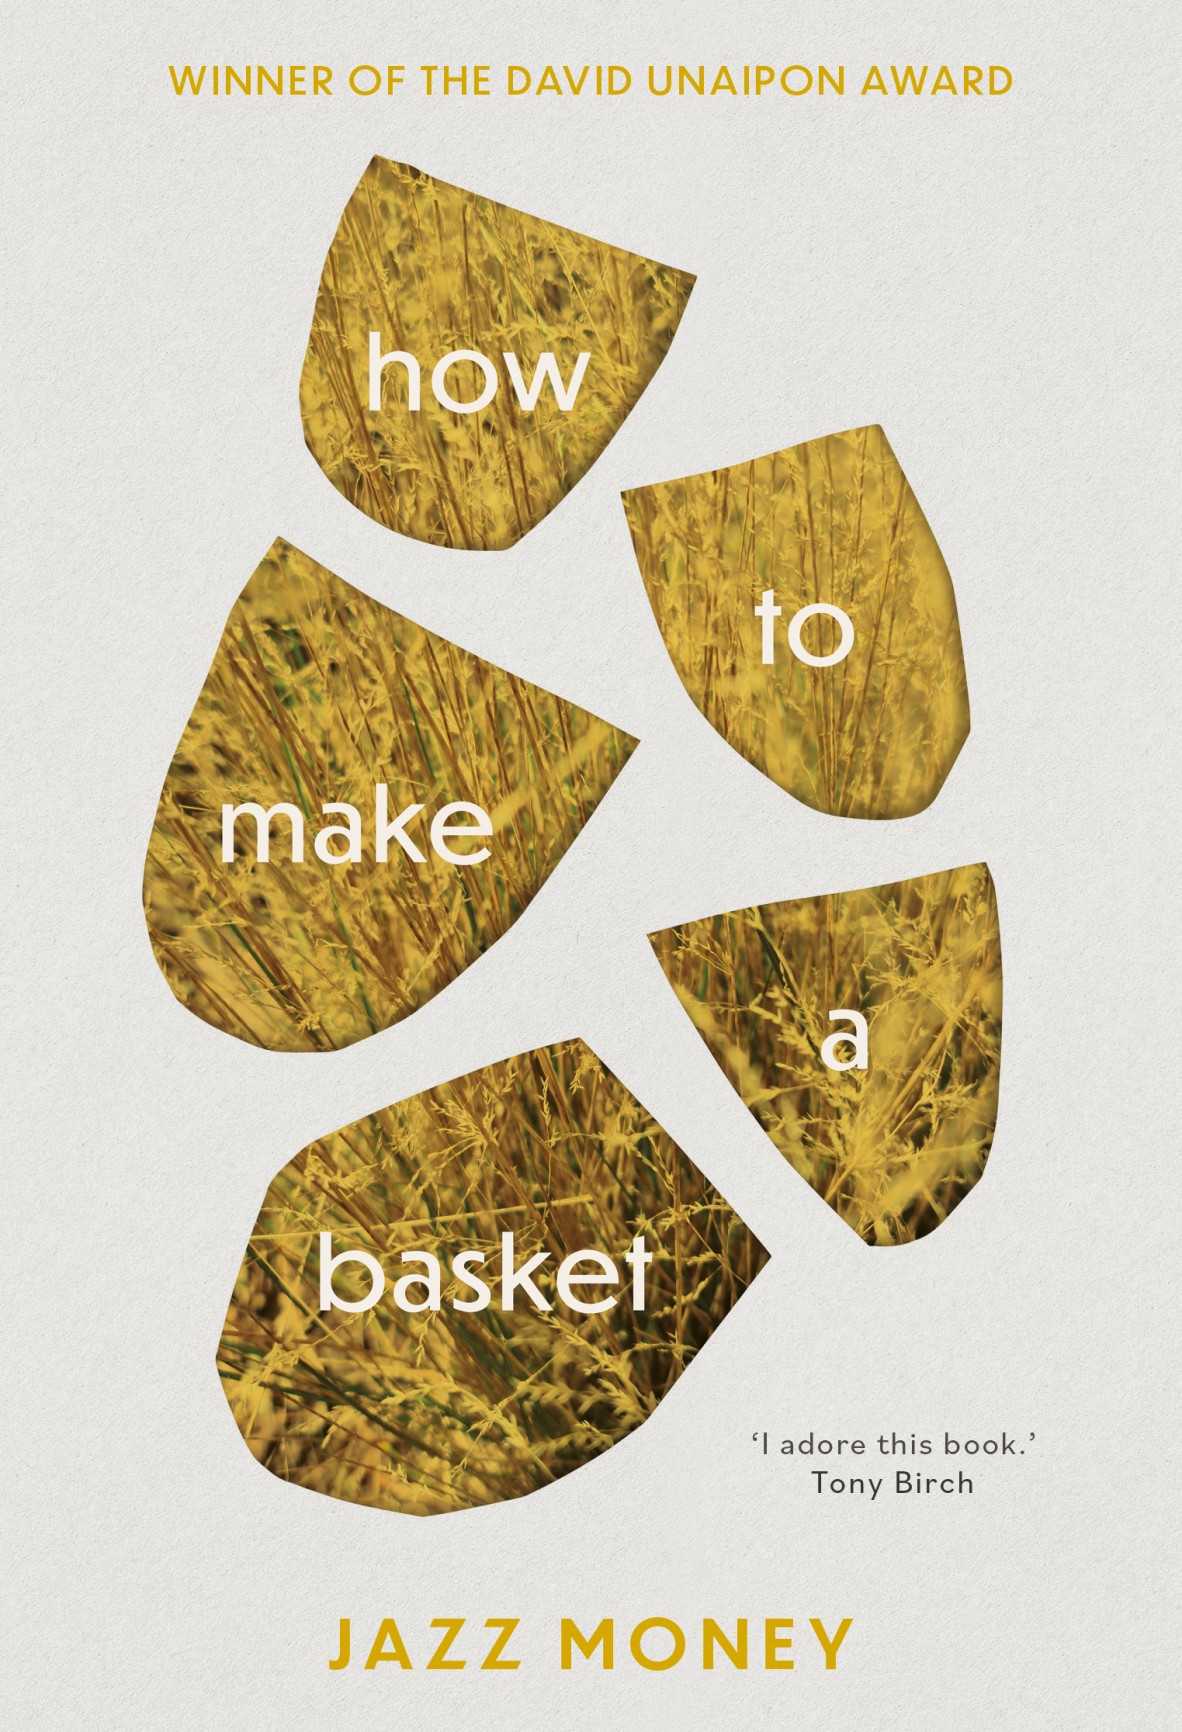 how to make a basket by Jazz Money - the cover shows yellow pieces with a background of wheat The cover is white